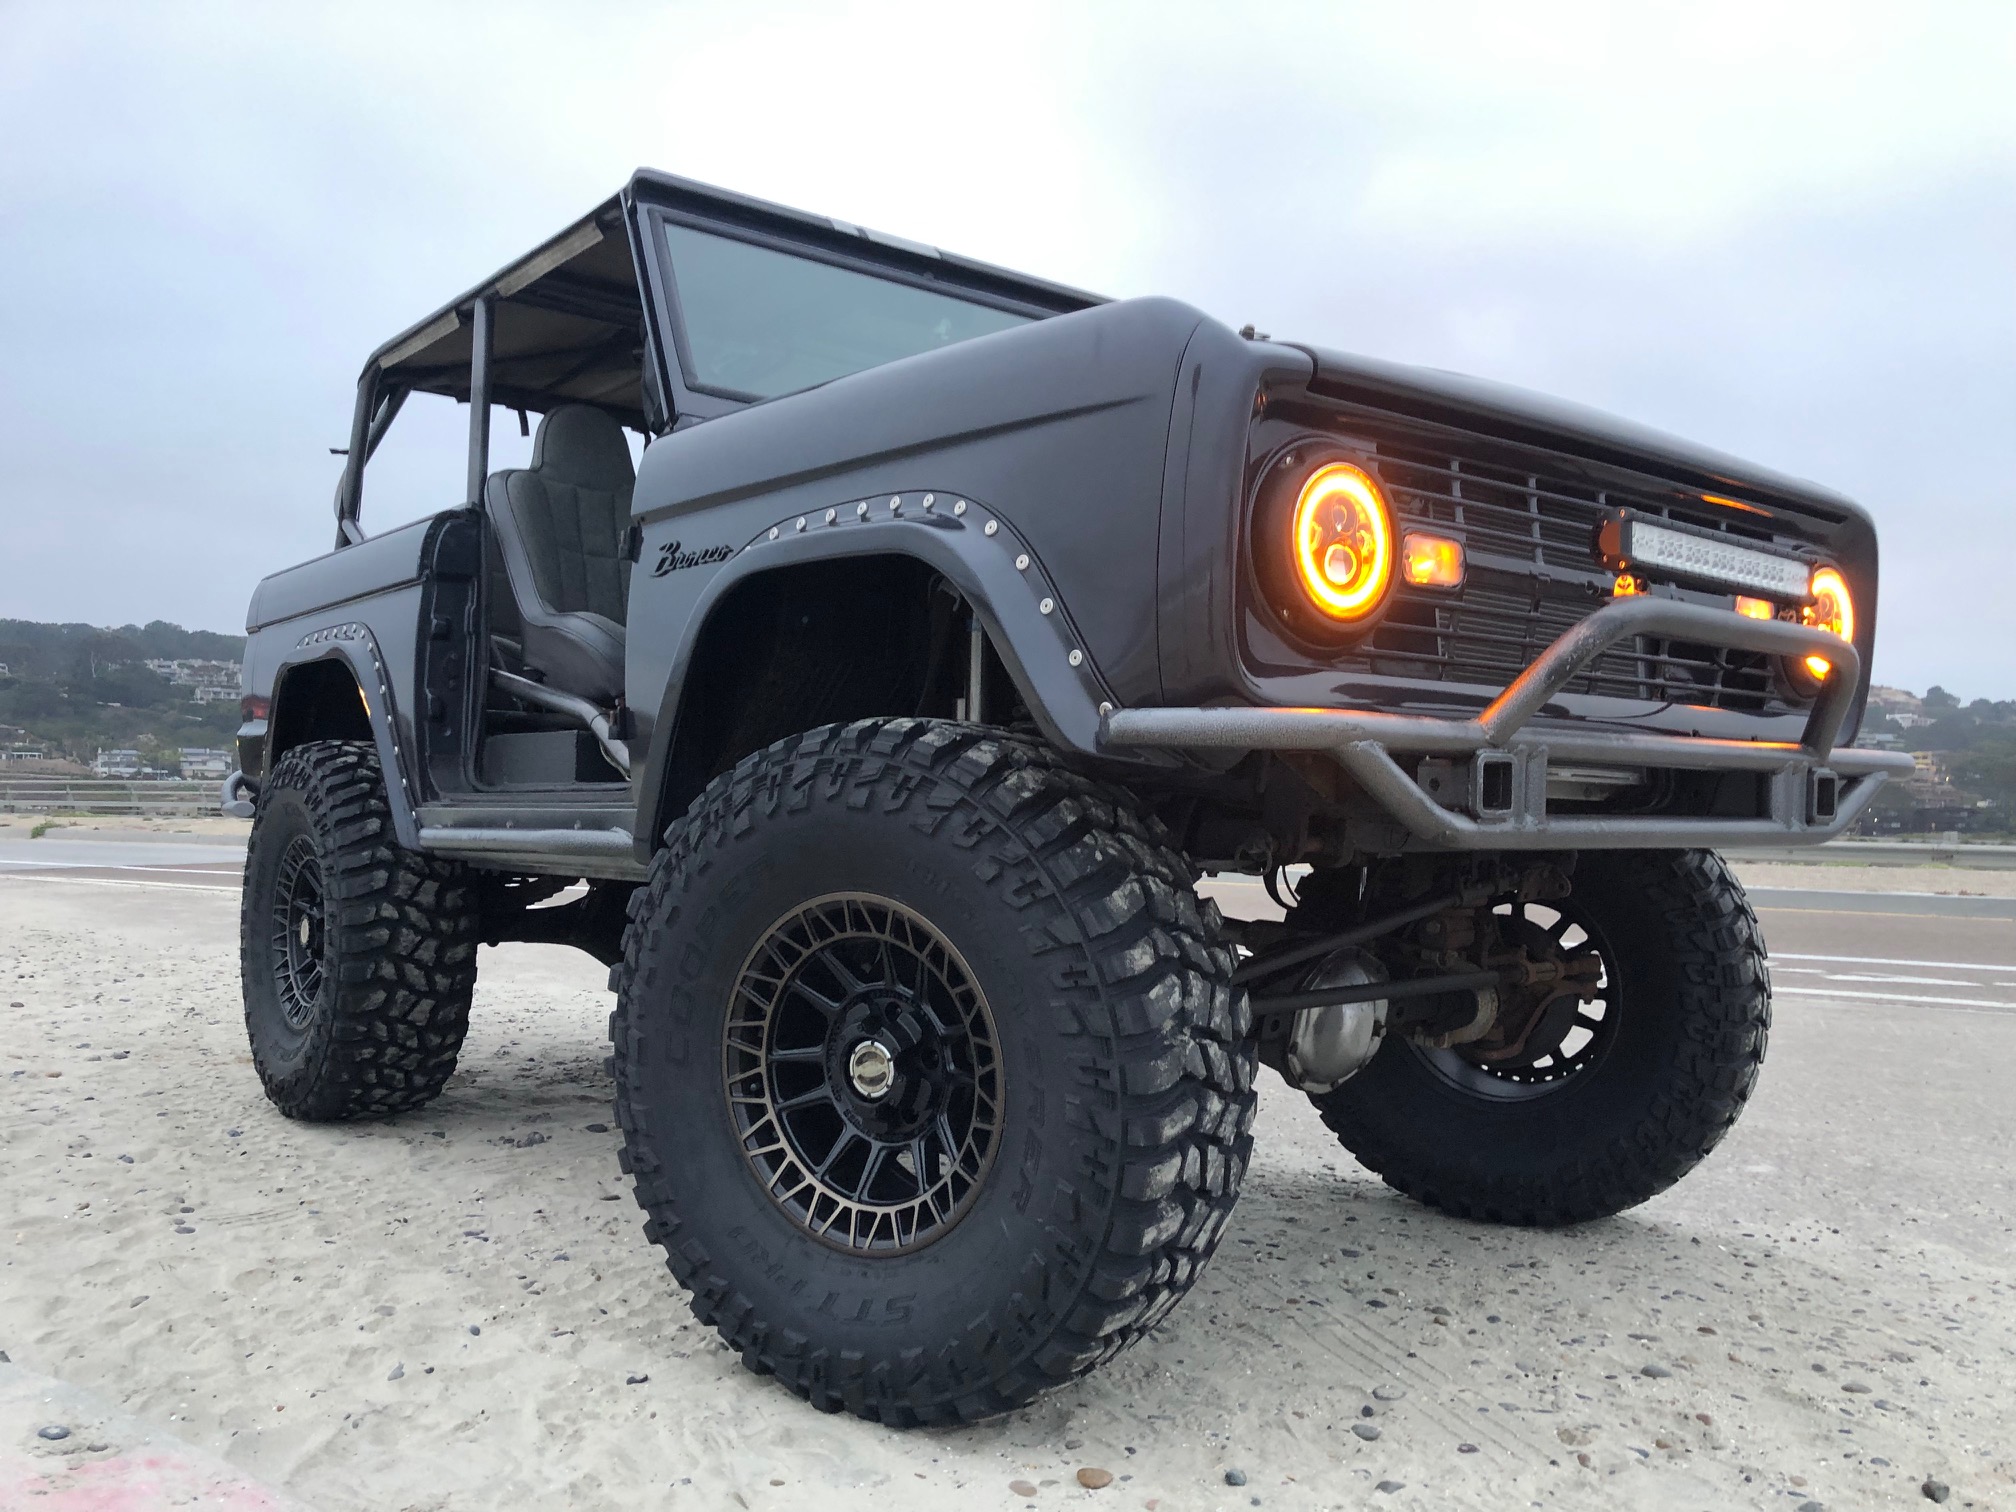 FORD BRONCO 1970 4PLAY WHEELS S12 SPORT SERIES 17X9 ON 37X13.5X17 COOPER TIRES 1480